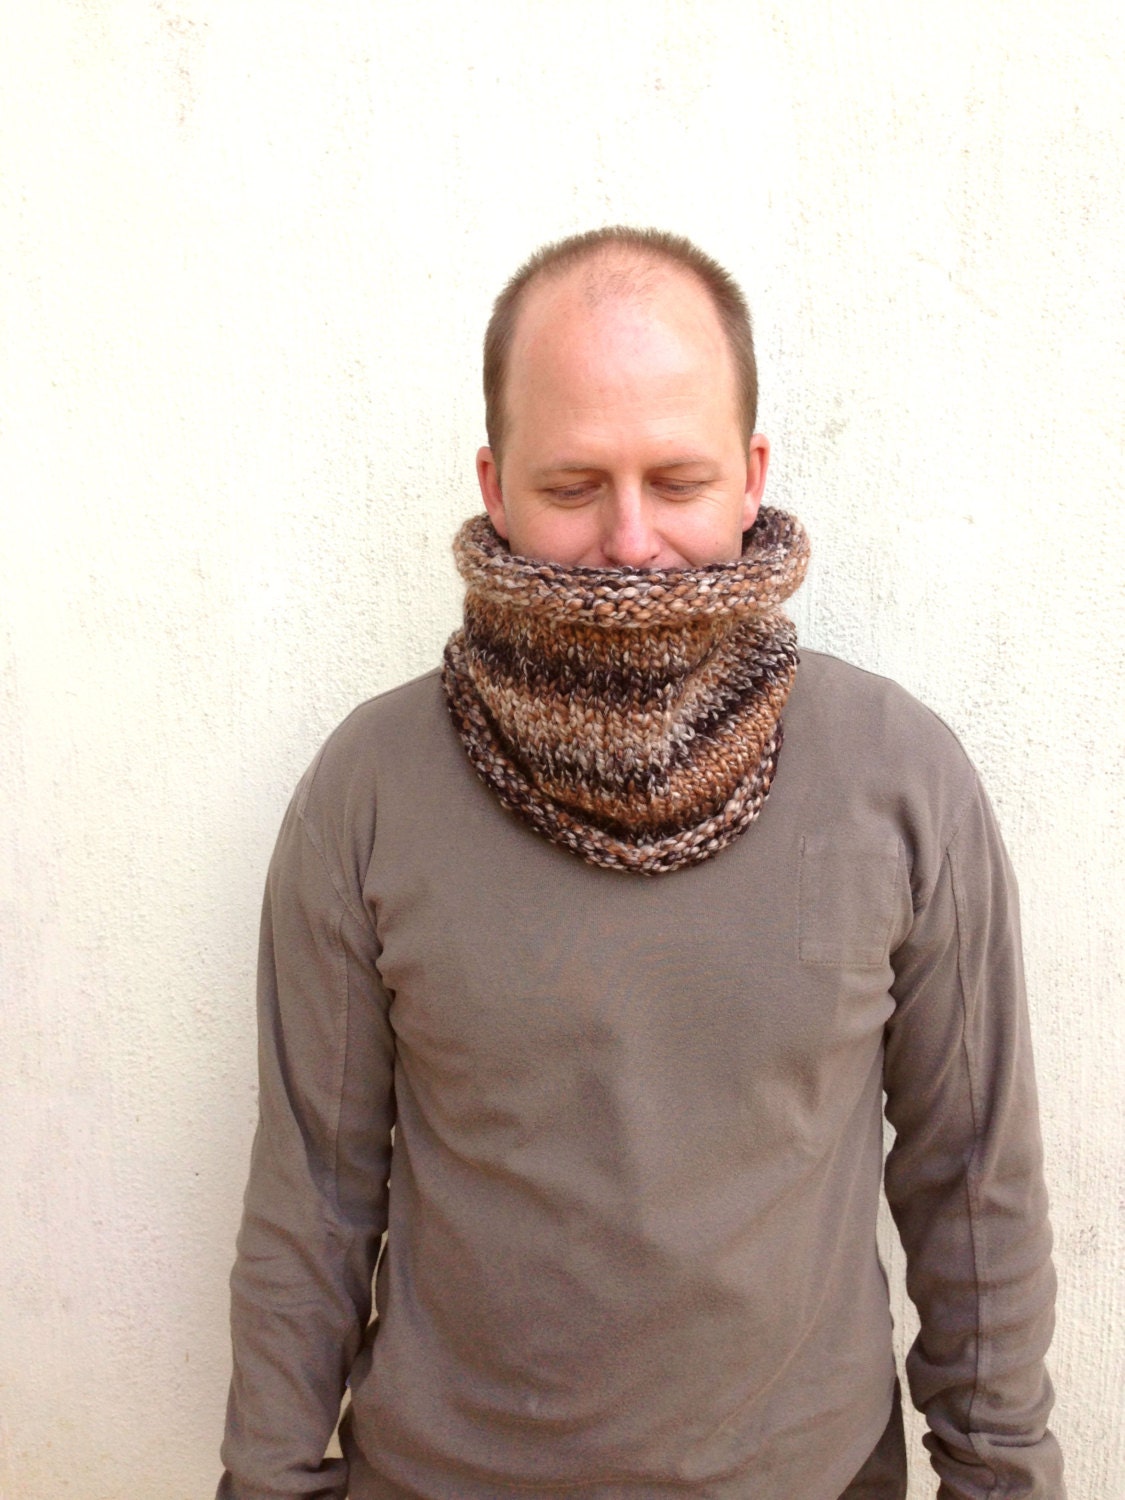 Knit Cowl, Ombre scarf, Unisex scarf, Neckwarmer, Unisex cowl, Multi - colored yarn, for him and for her - VeraJayne